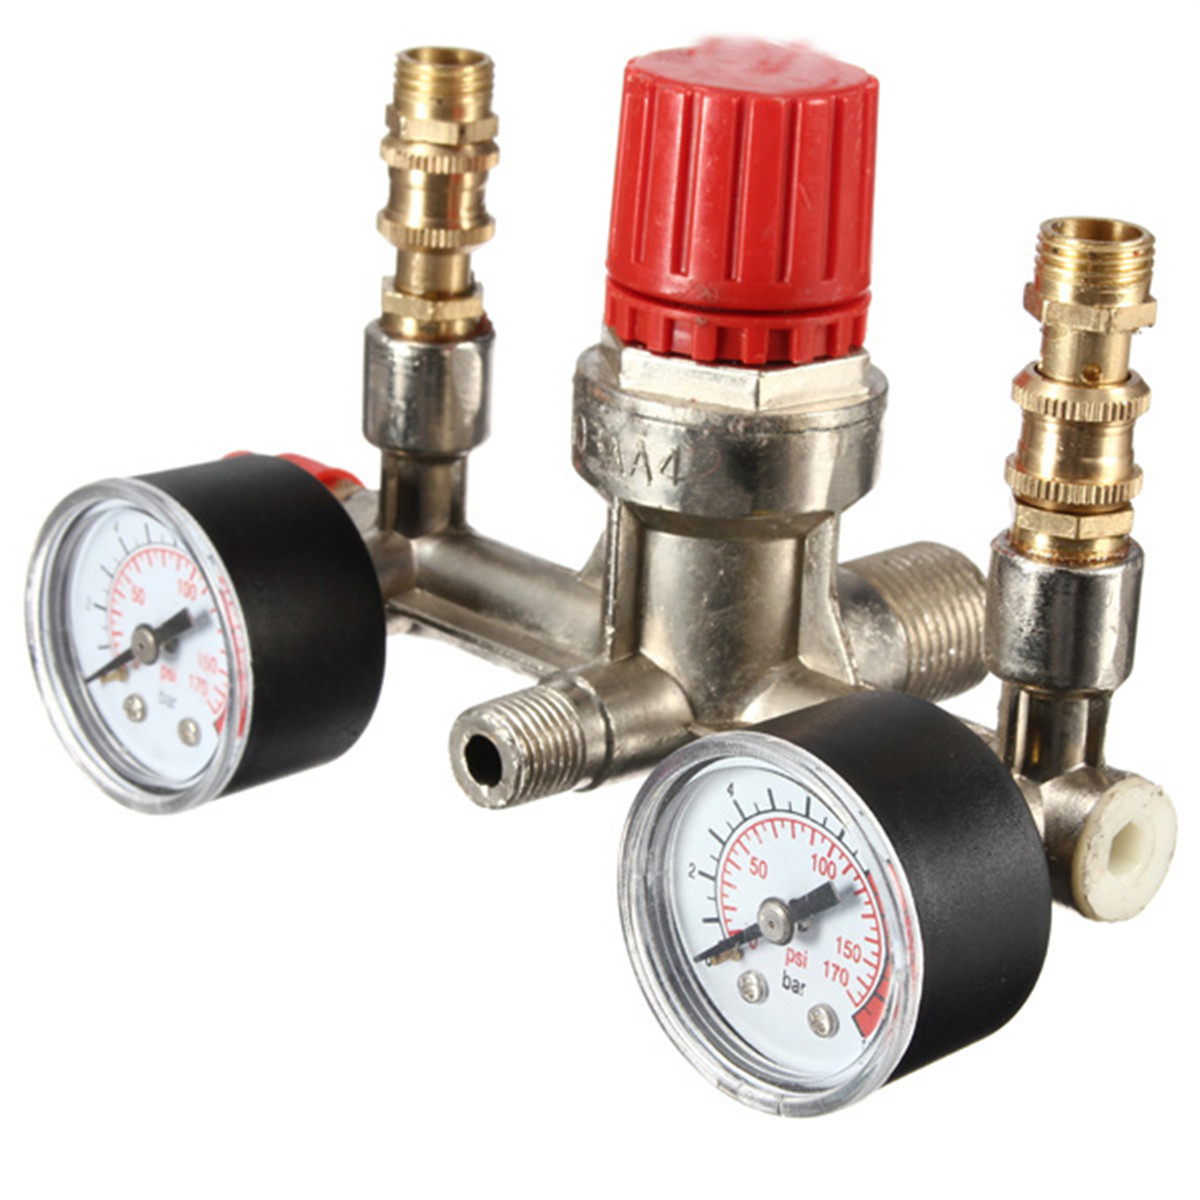 Find Regulator Air Compressor Pump Pressure Control Switch Valve Gauge Heaty Duty for Sale on Gipsybee.com with cryptocurrencies